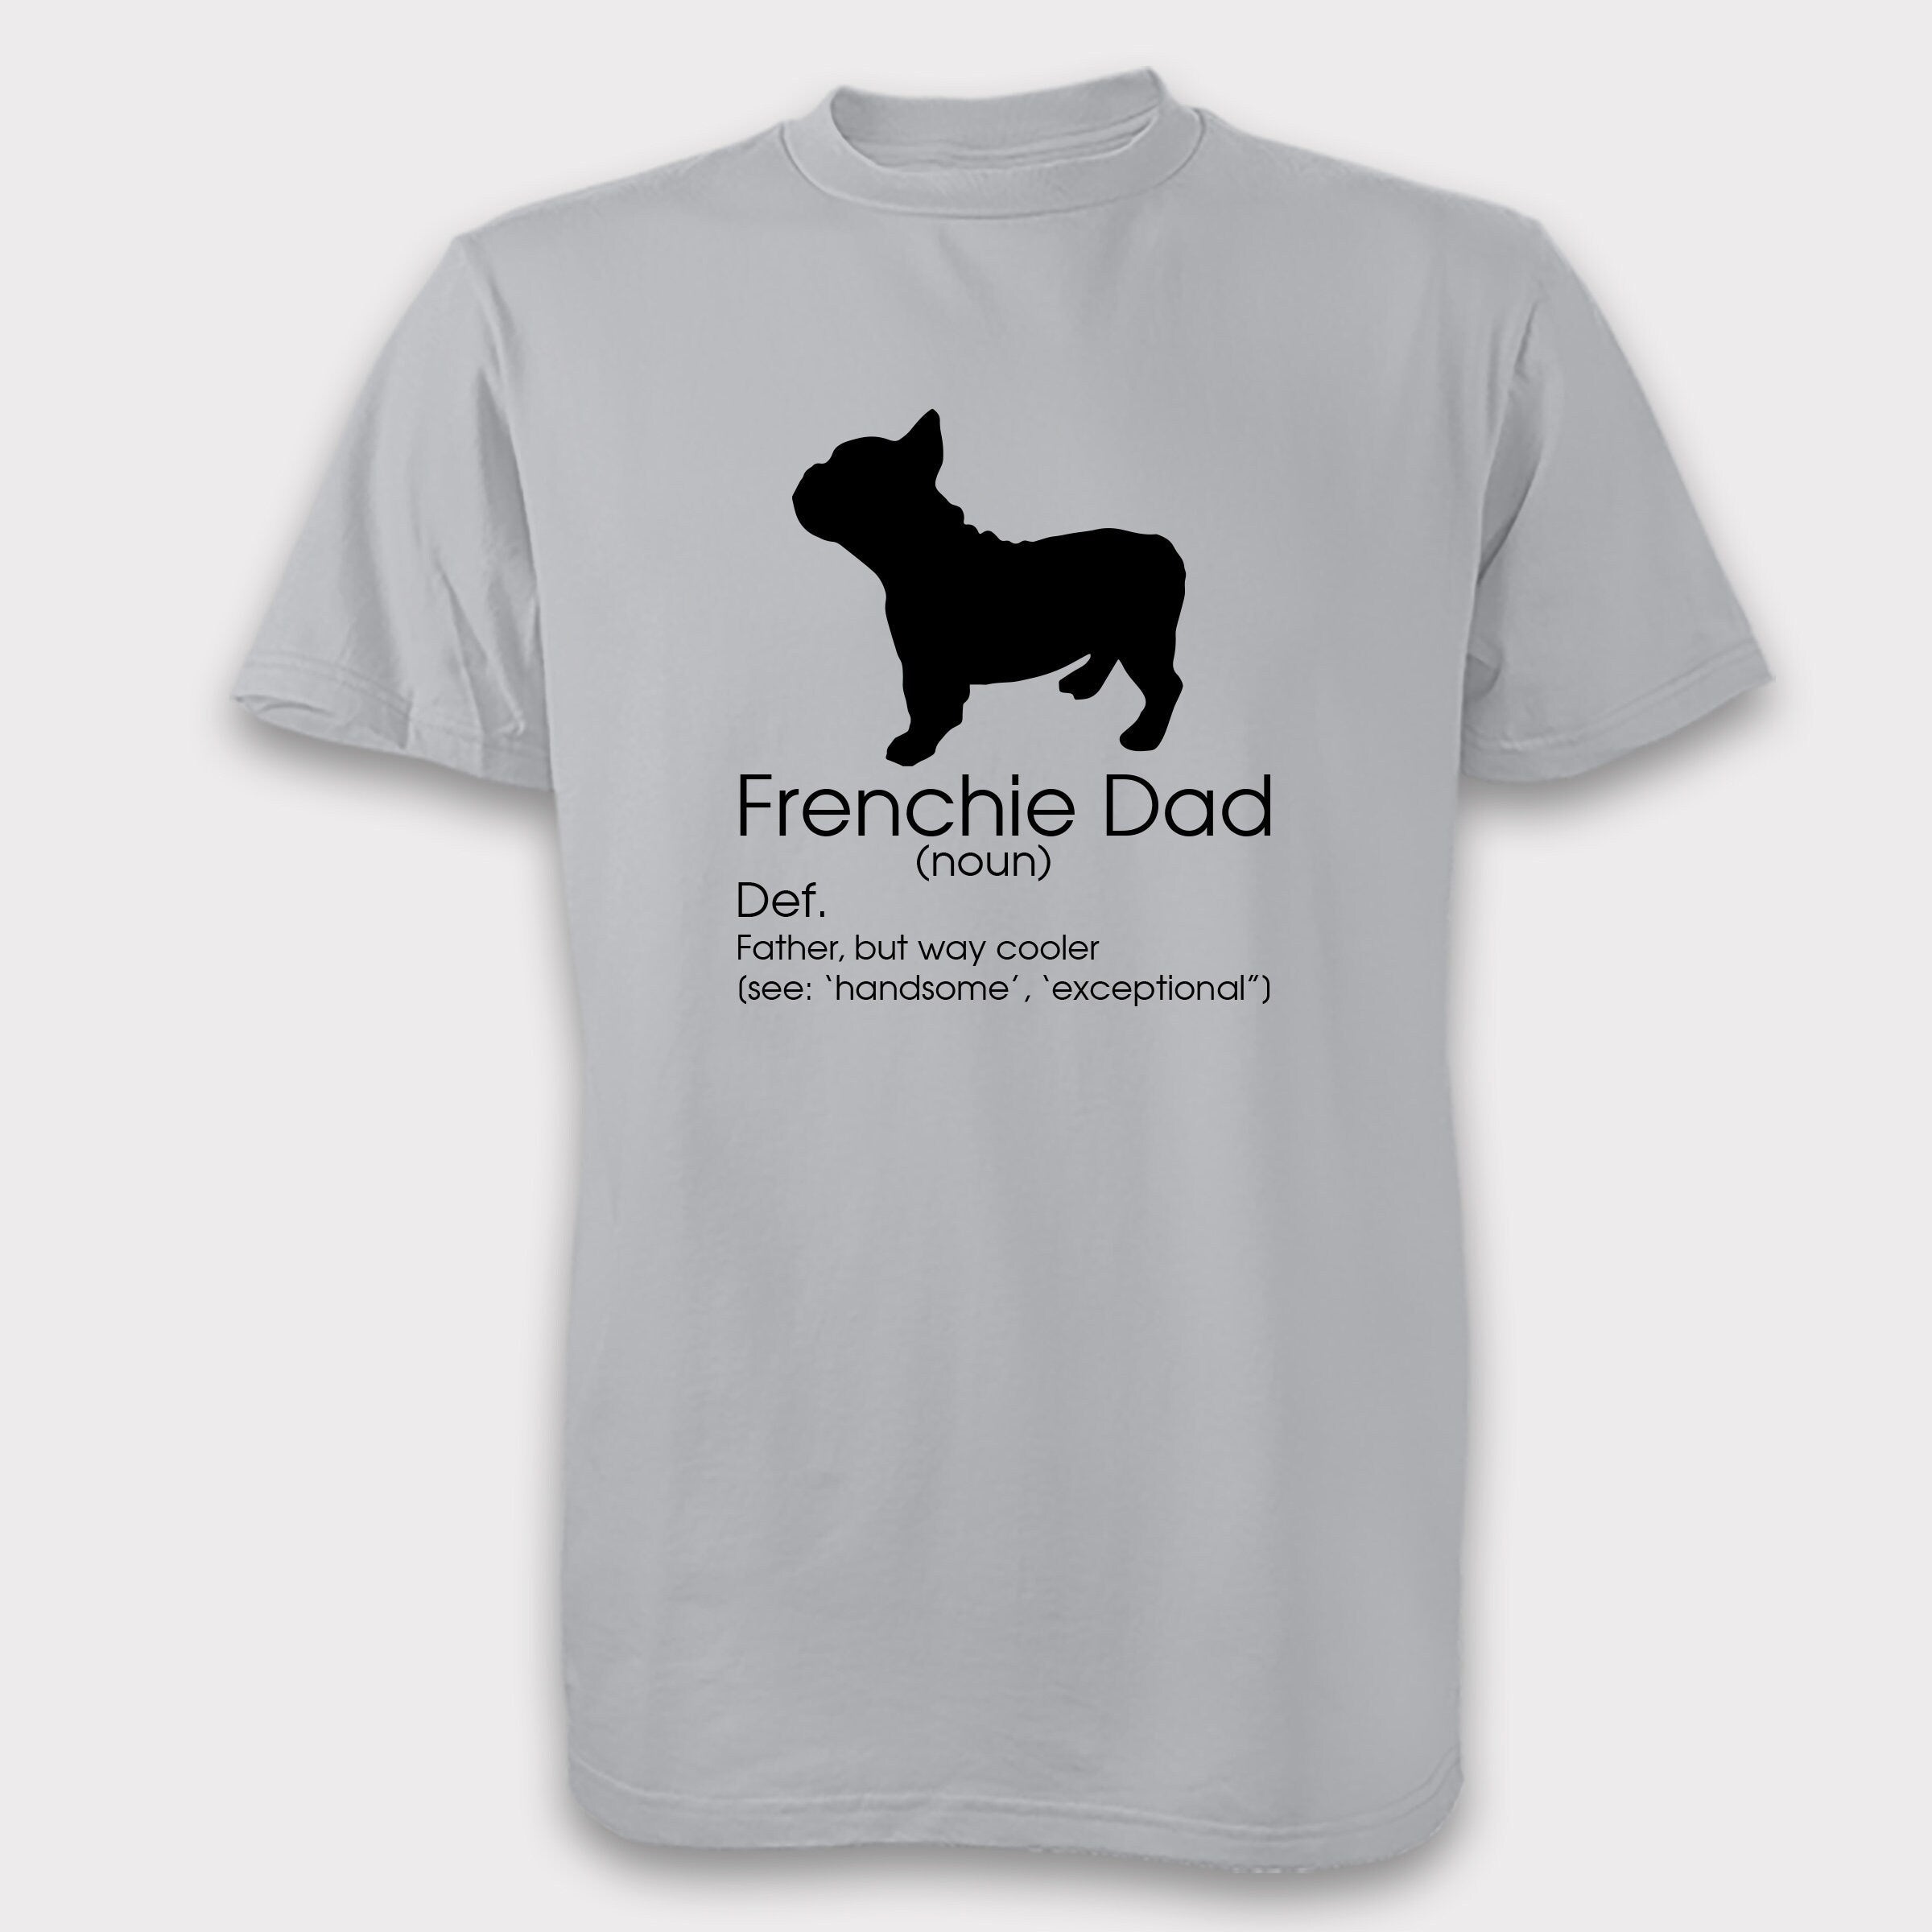 Frenchie Dad Tee